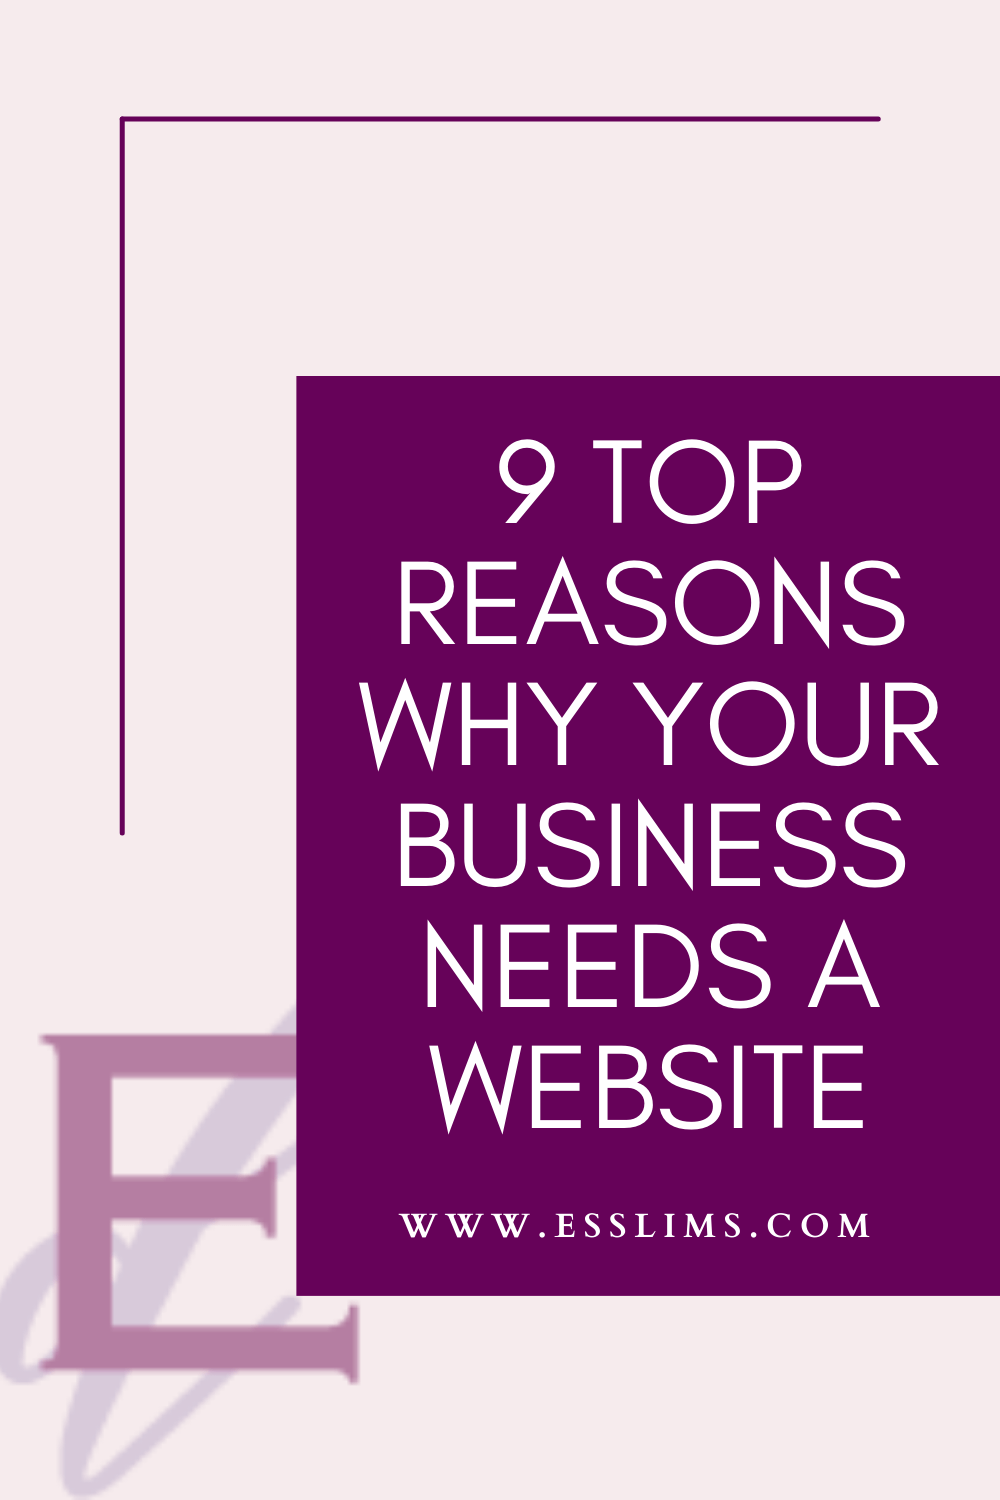 9 top reasons why your business needs a website